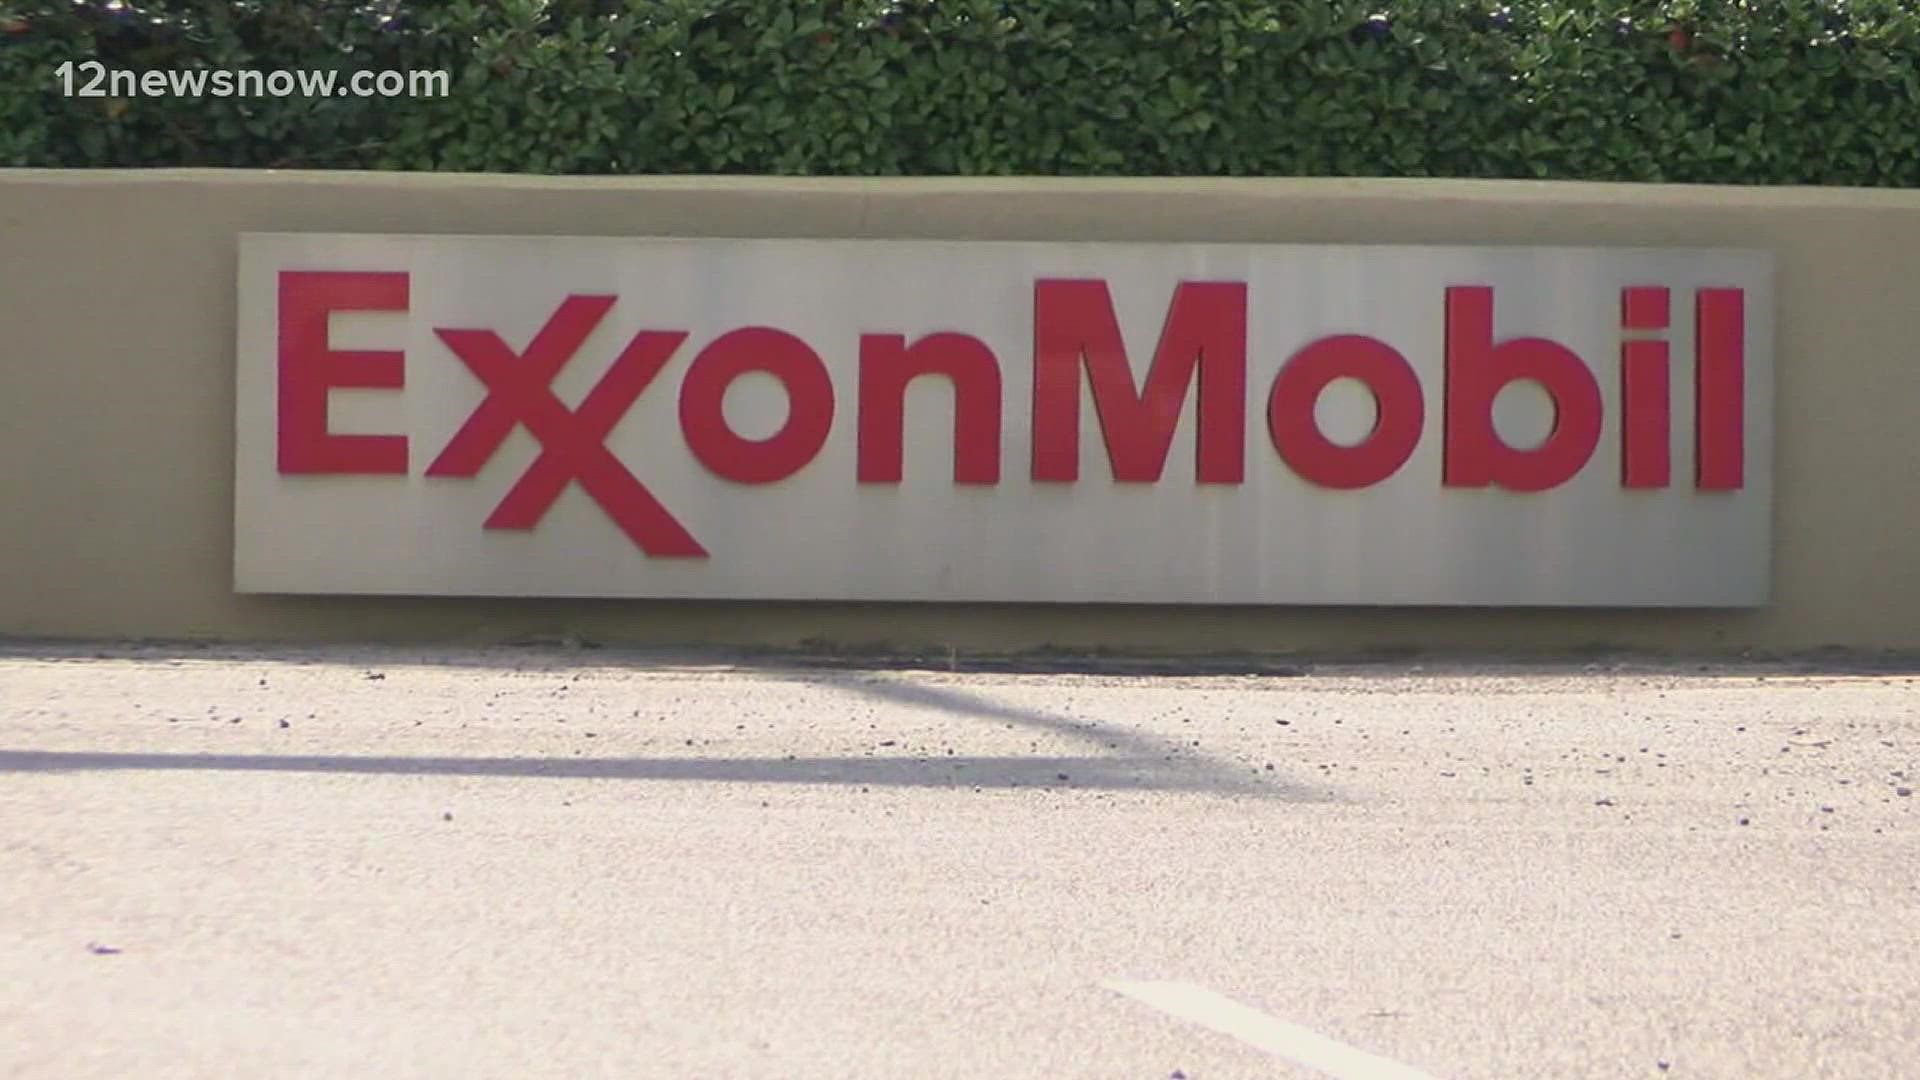 It'll take a majority of the union members to vote in favor of Exxon's latest proposal.